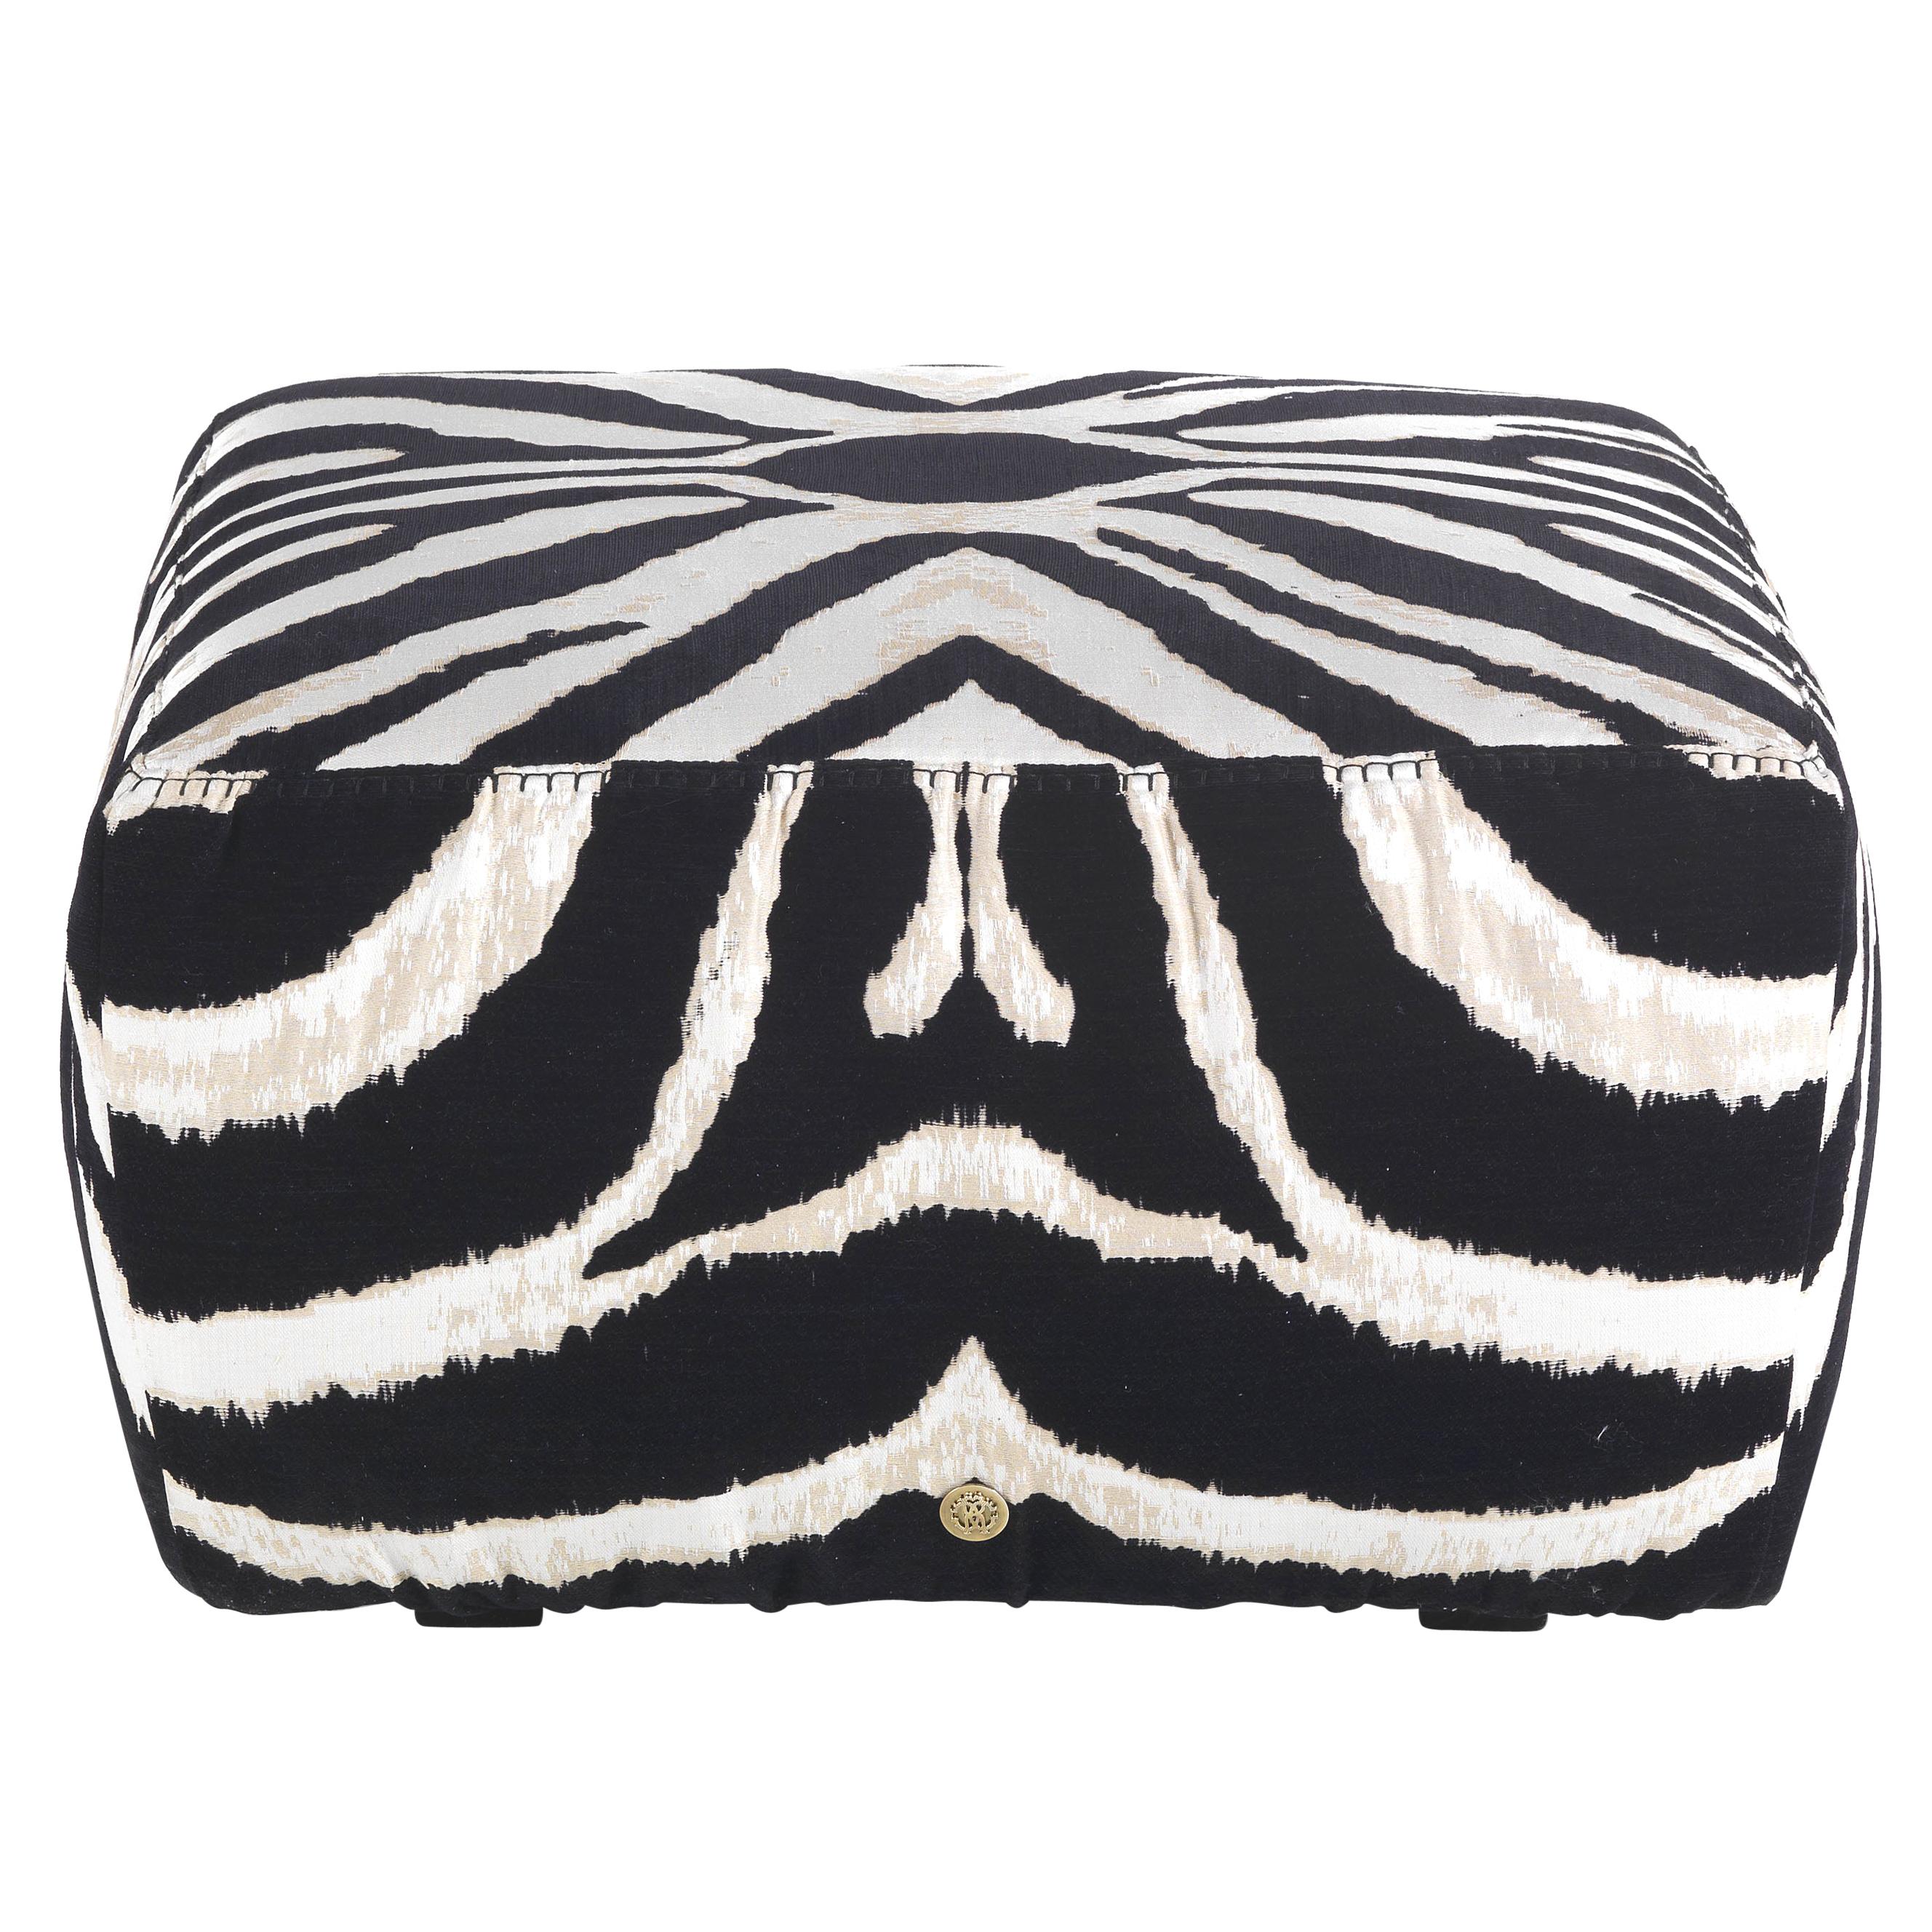 21st Century Hamptons.2 Pouf in Fabric by Roberto Cavalli Home Interiors  For Sale